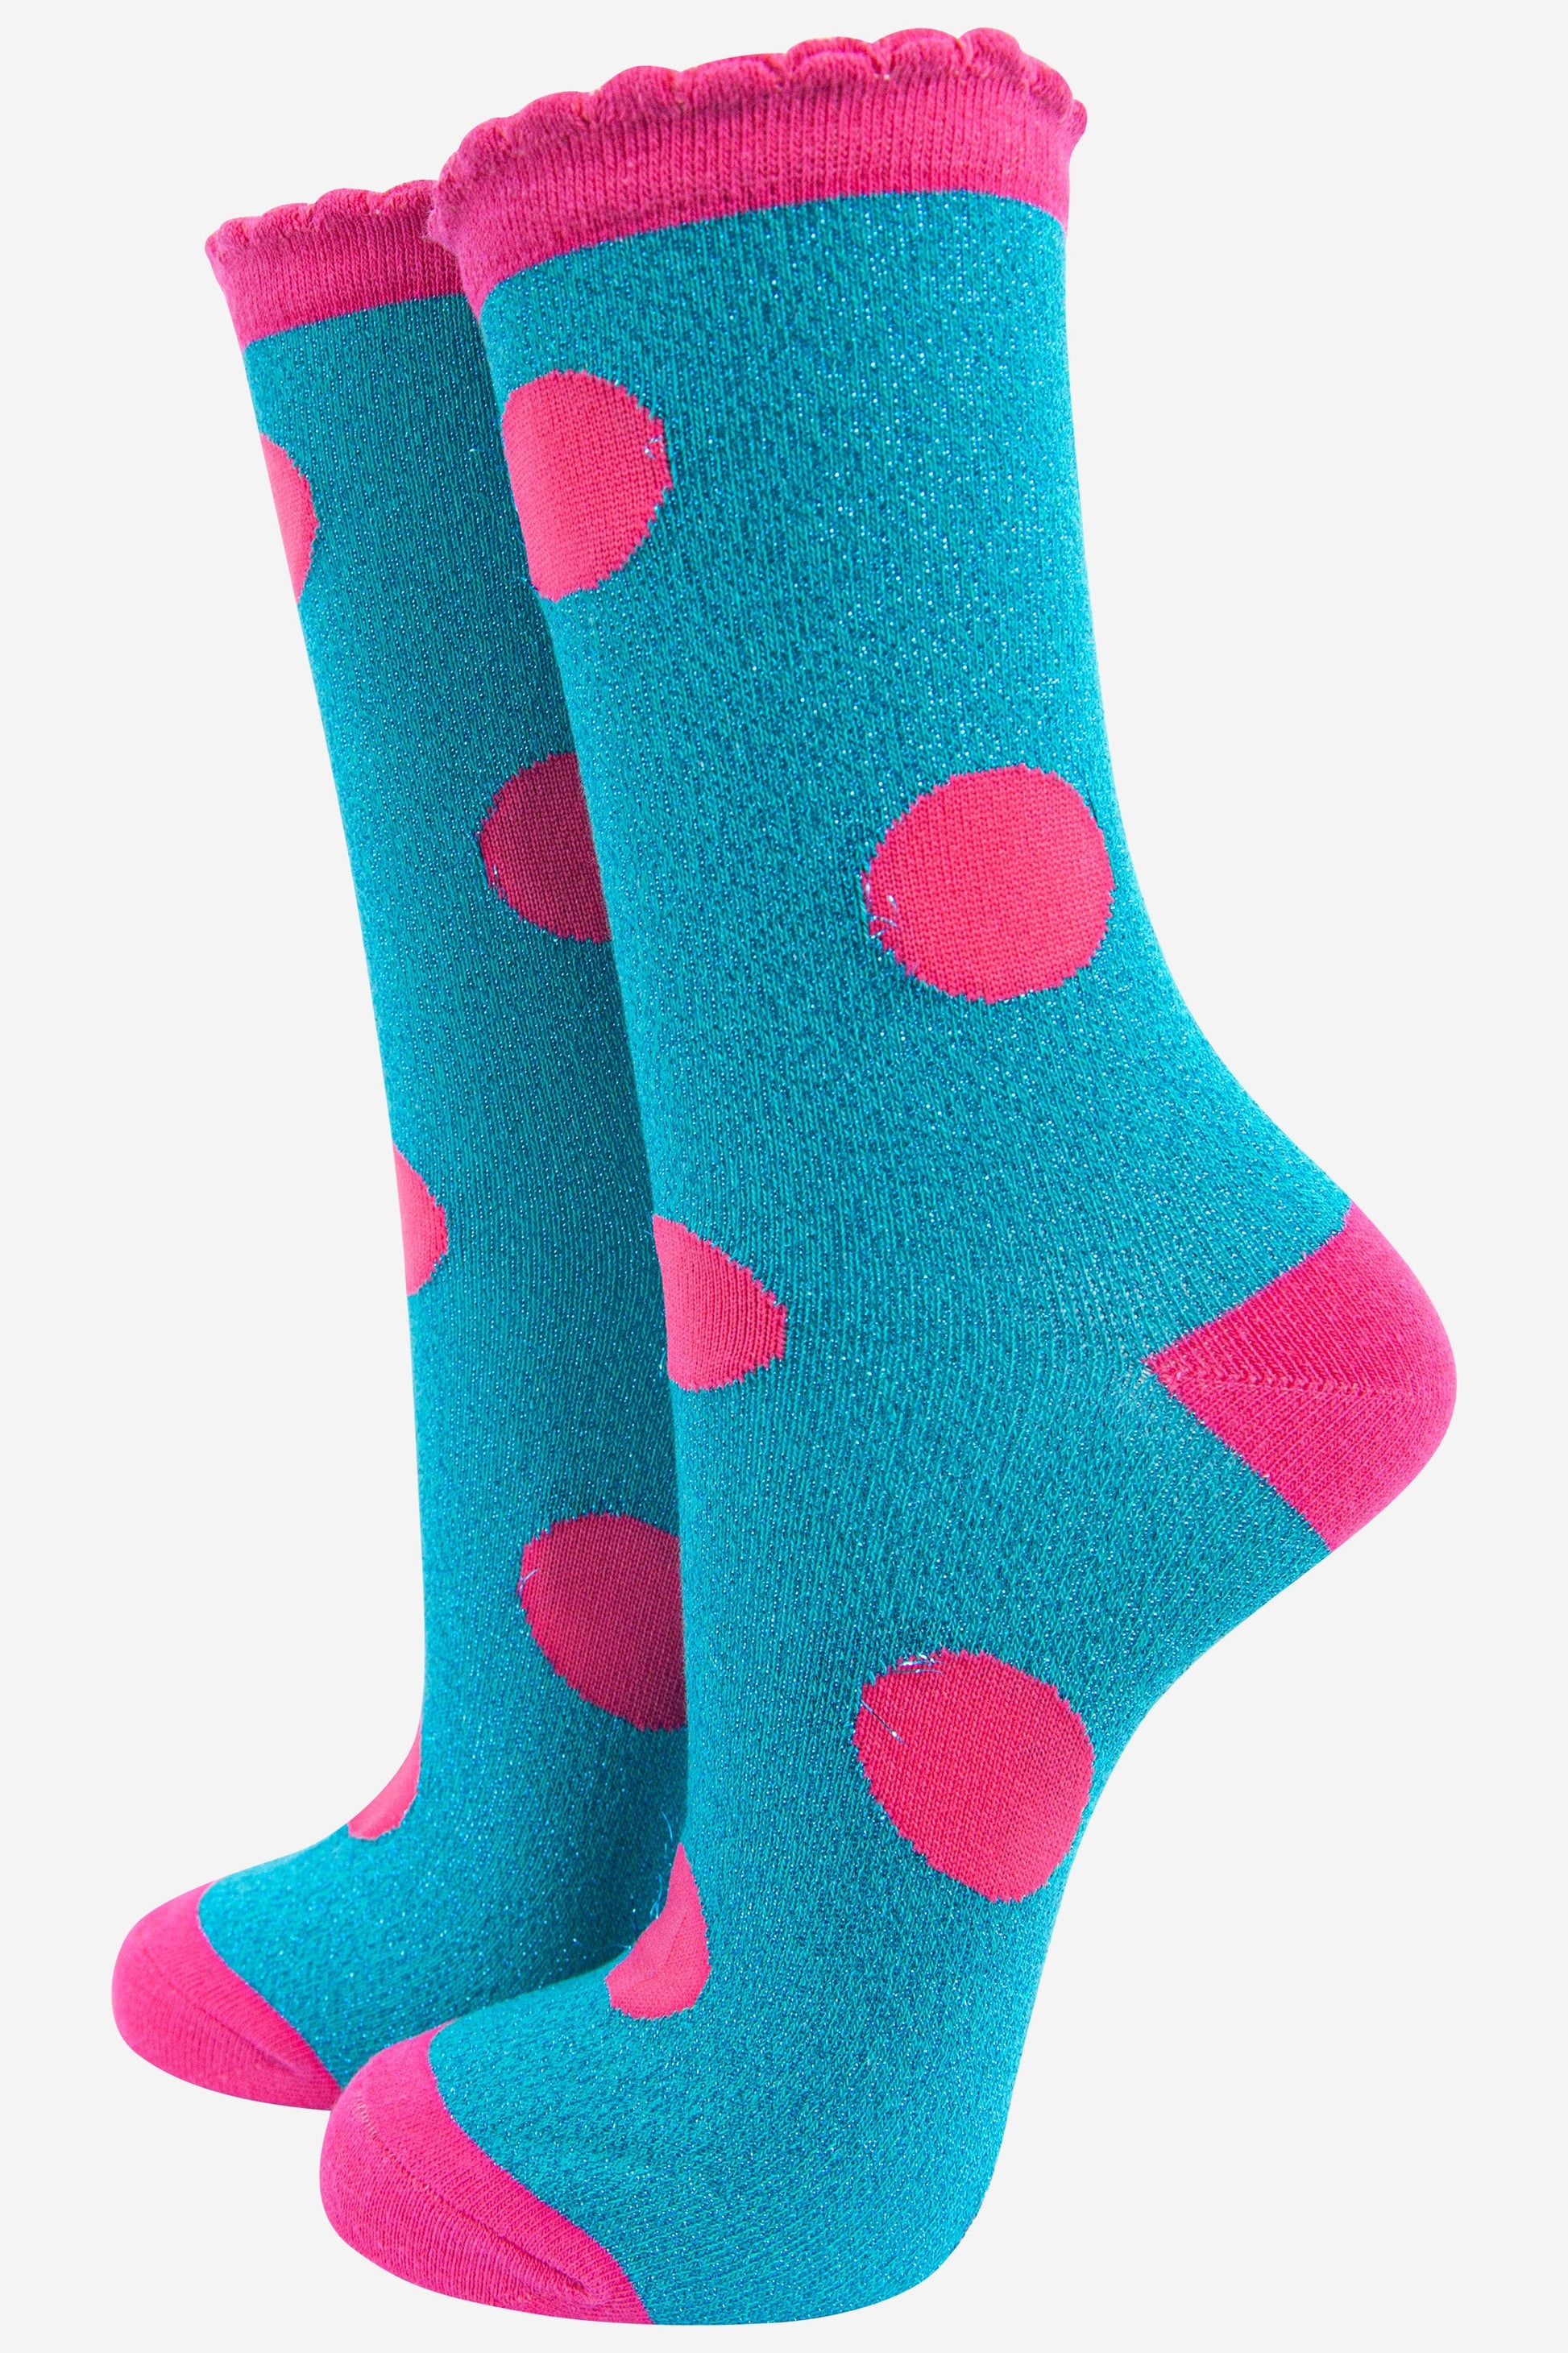 turquoise and pink polka dot ankle socks with an all over glitter sparkle